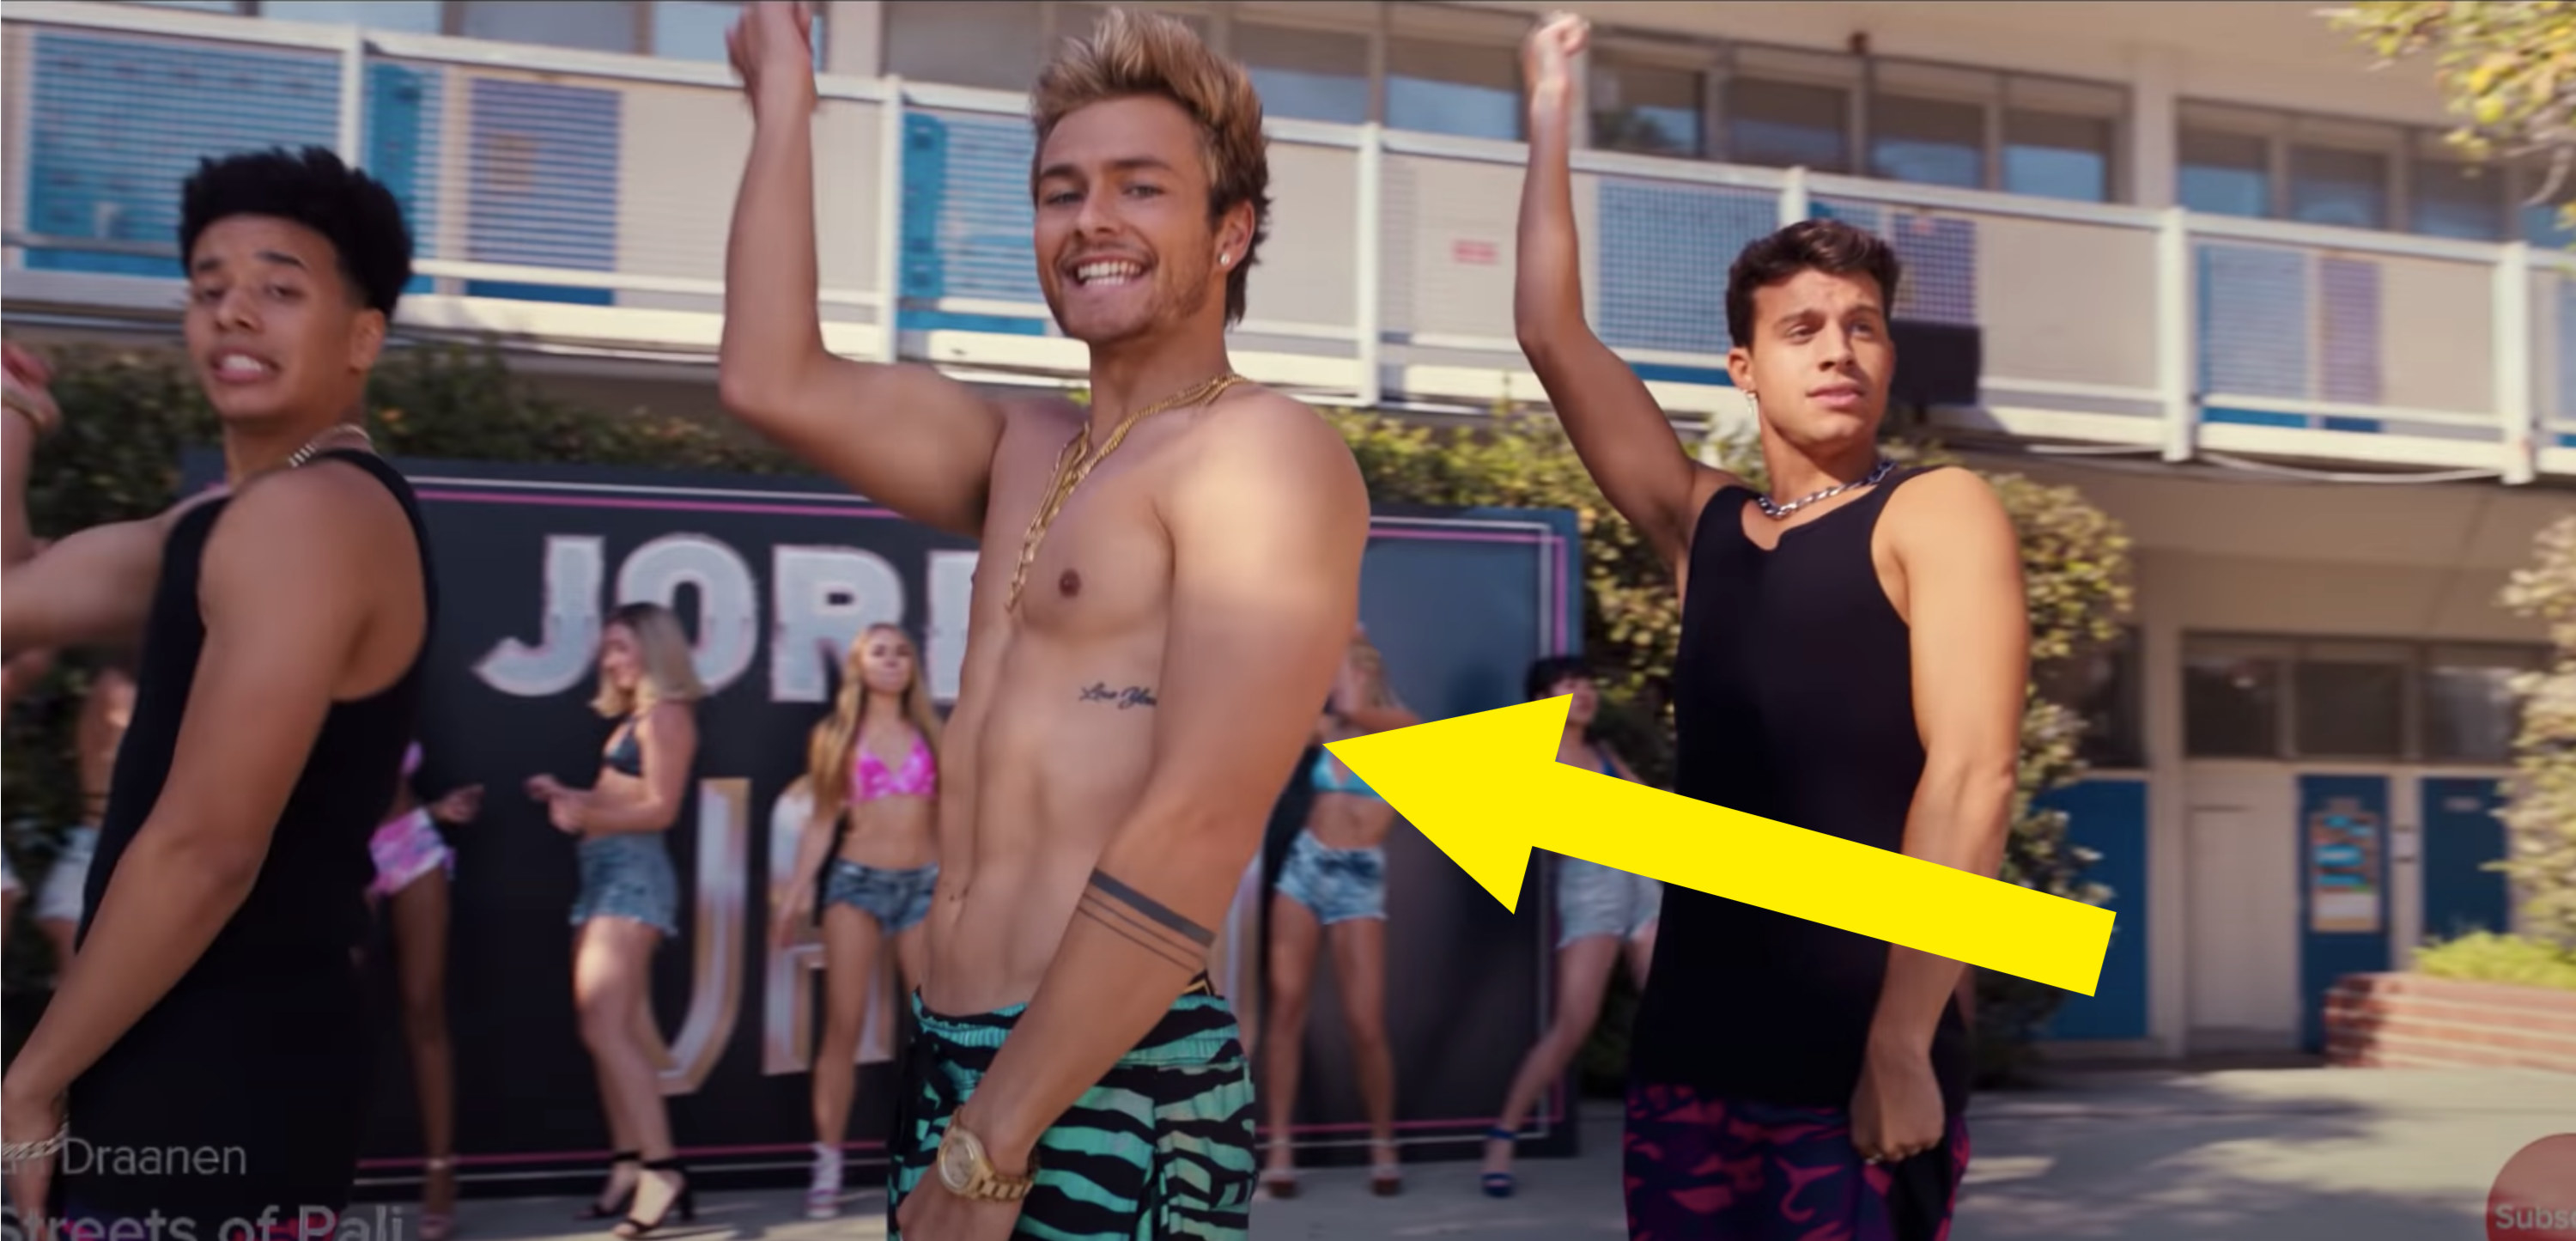 An arrow pointed at a shirtless man seeming doing a choreographed dance with two men